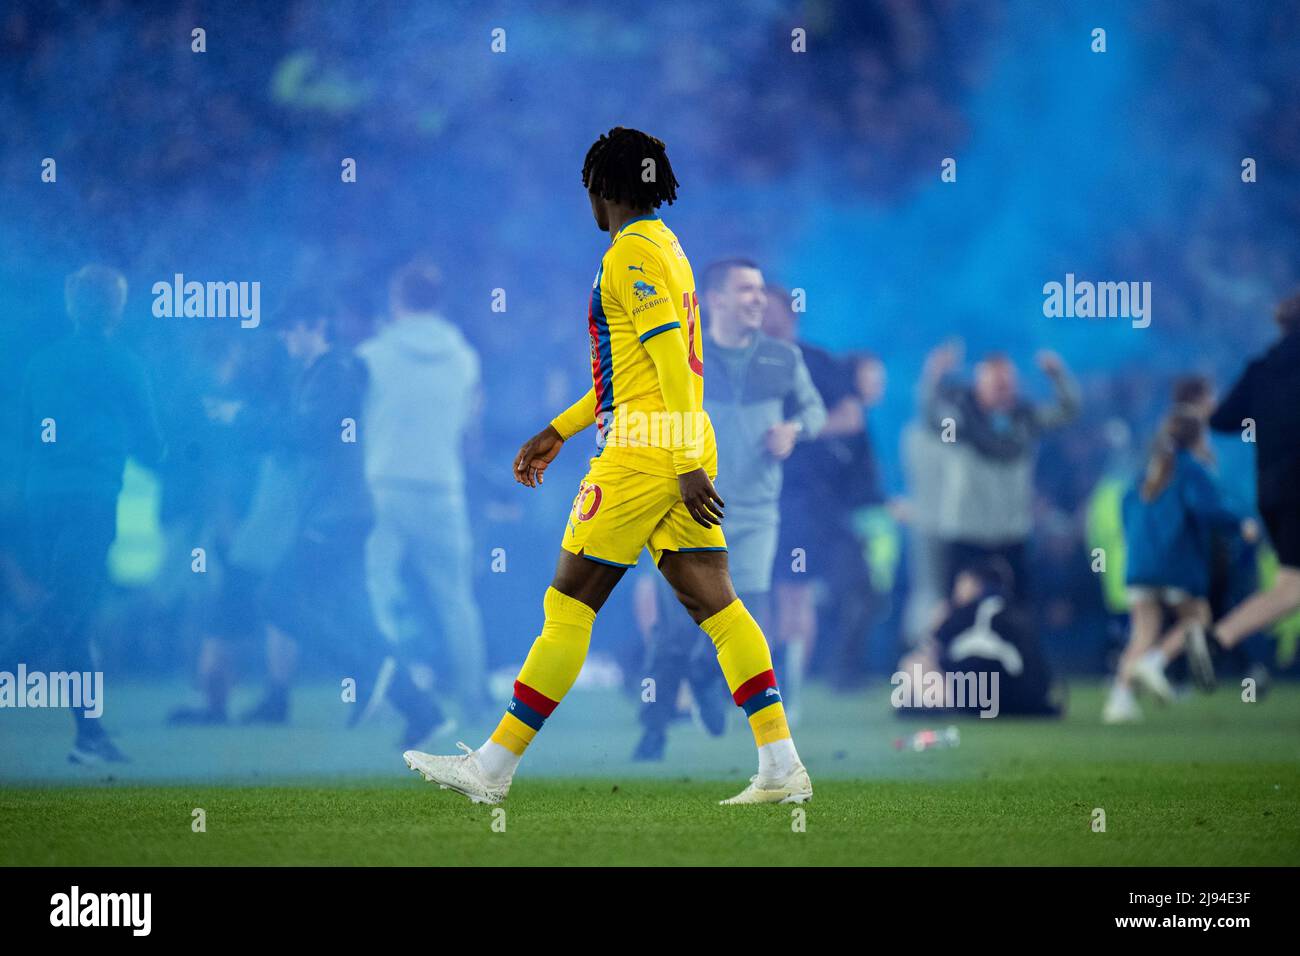 LIVERPOOL, ENGLAND - MAY 19: Eberechi Eze of Crystal Palace and Everton fans during the Premier League match between Everton and Crystal Palace at Goodison Park on May 19, 2022 in Liverpool, United Kingdom. (Photo by Sebastian Frej) Stock Photo